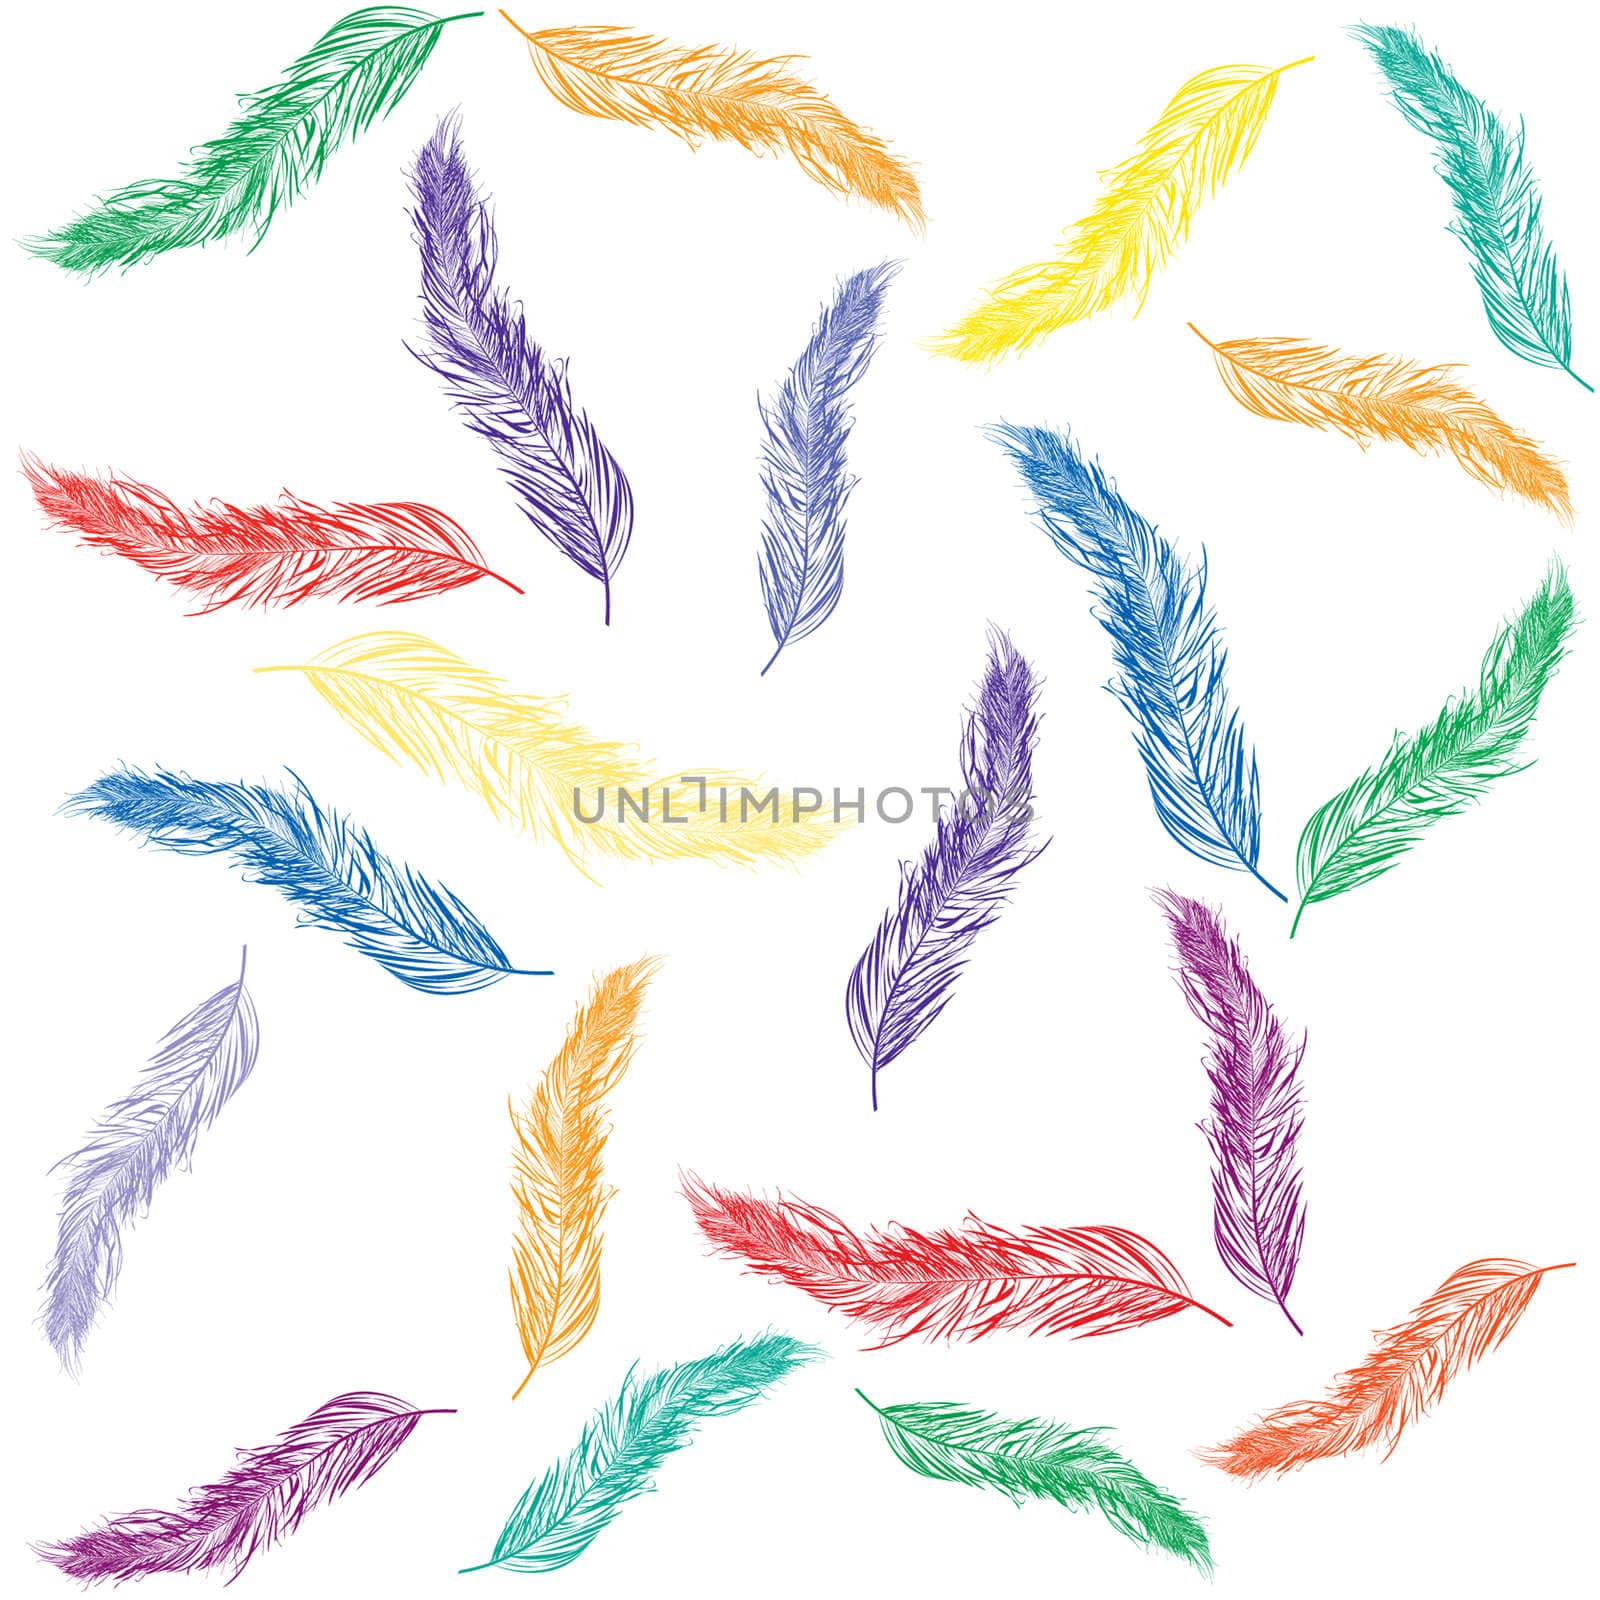 Colored feathers over white background